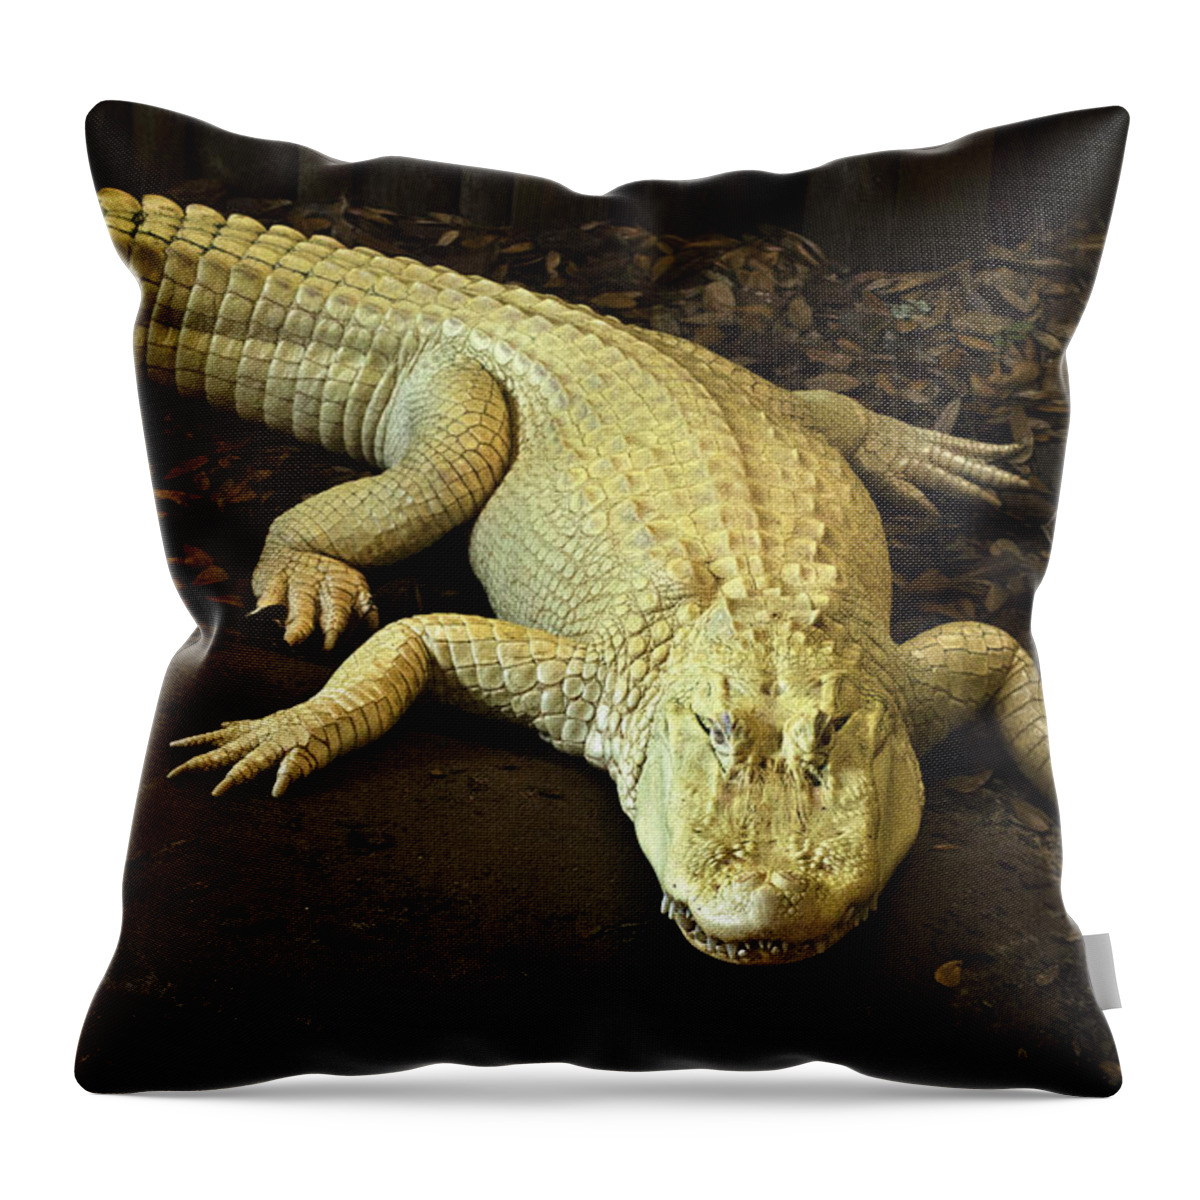  Throw Pillow featuring the photograph Albino Alligator by Bill Barber